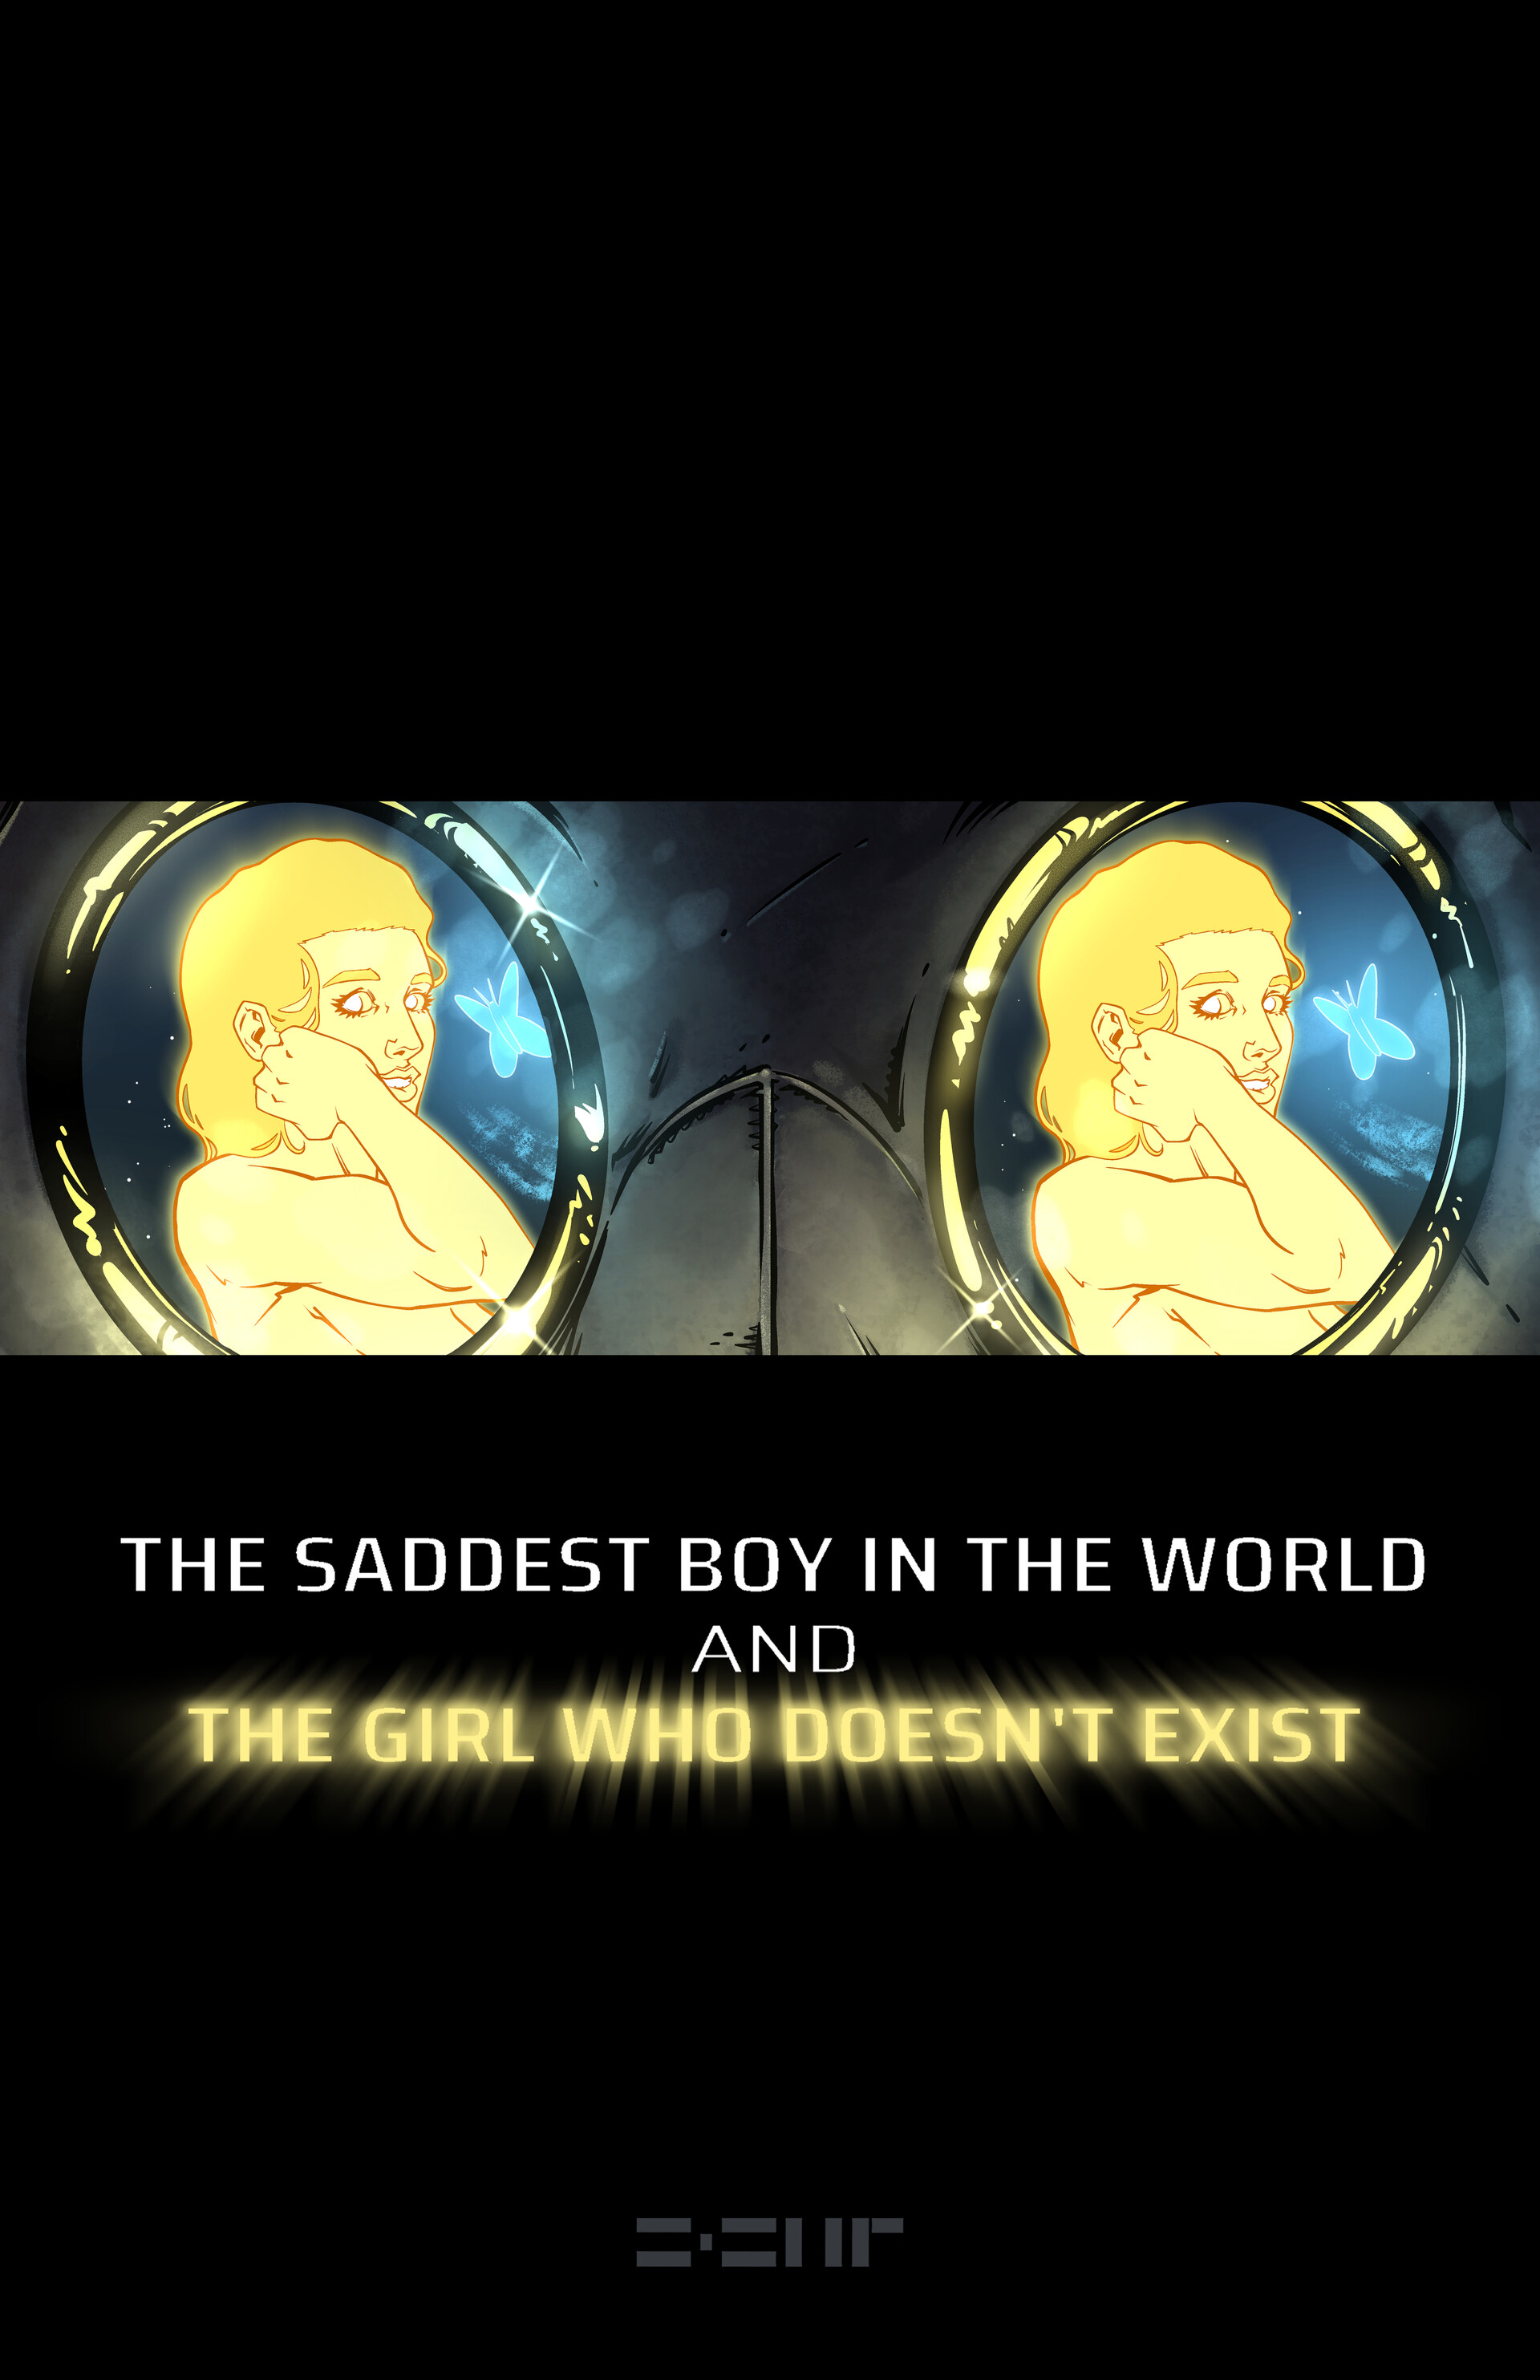 The Saddest Boy in The World and The Girl Who Doesn't Exist - Sample Comic